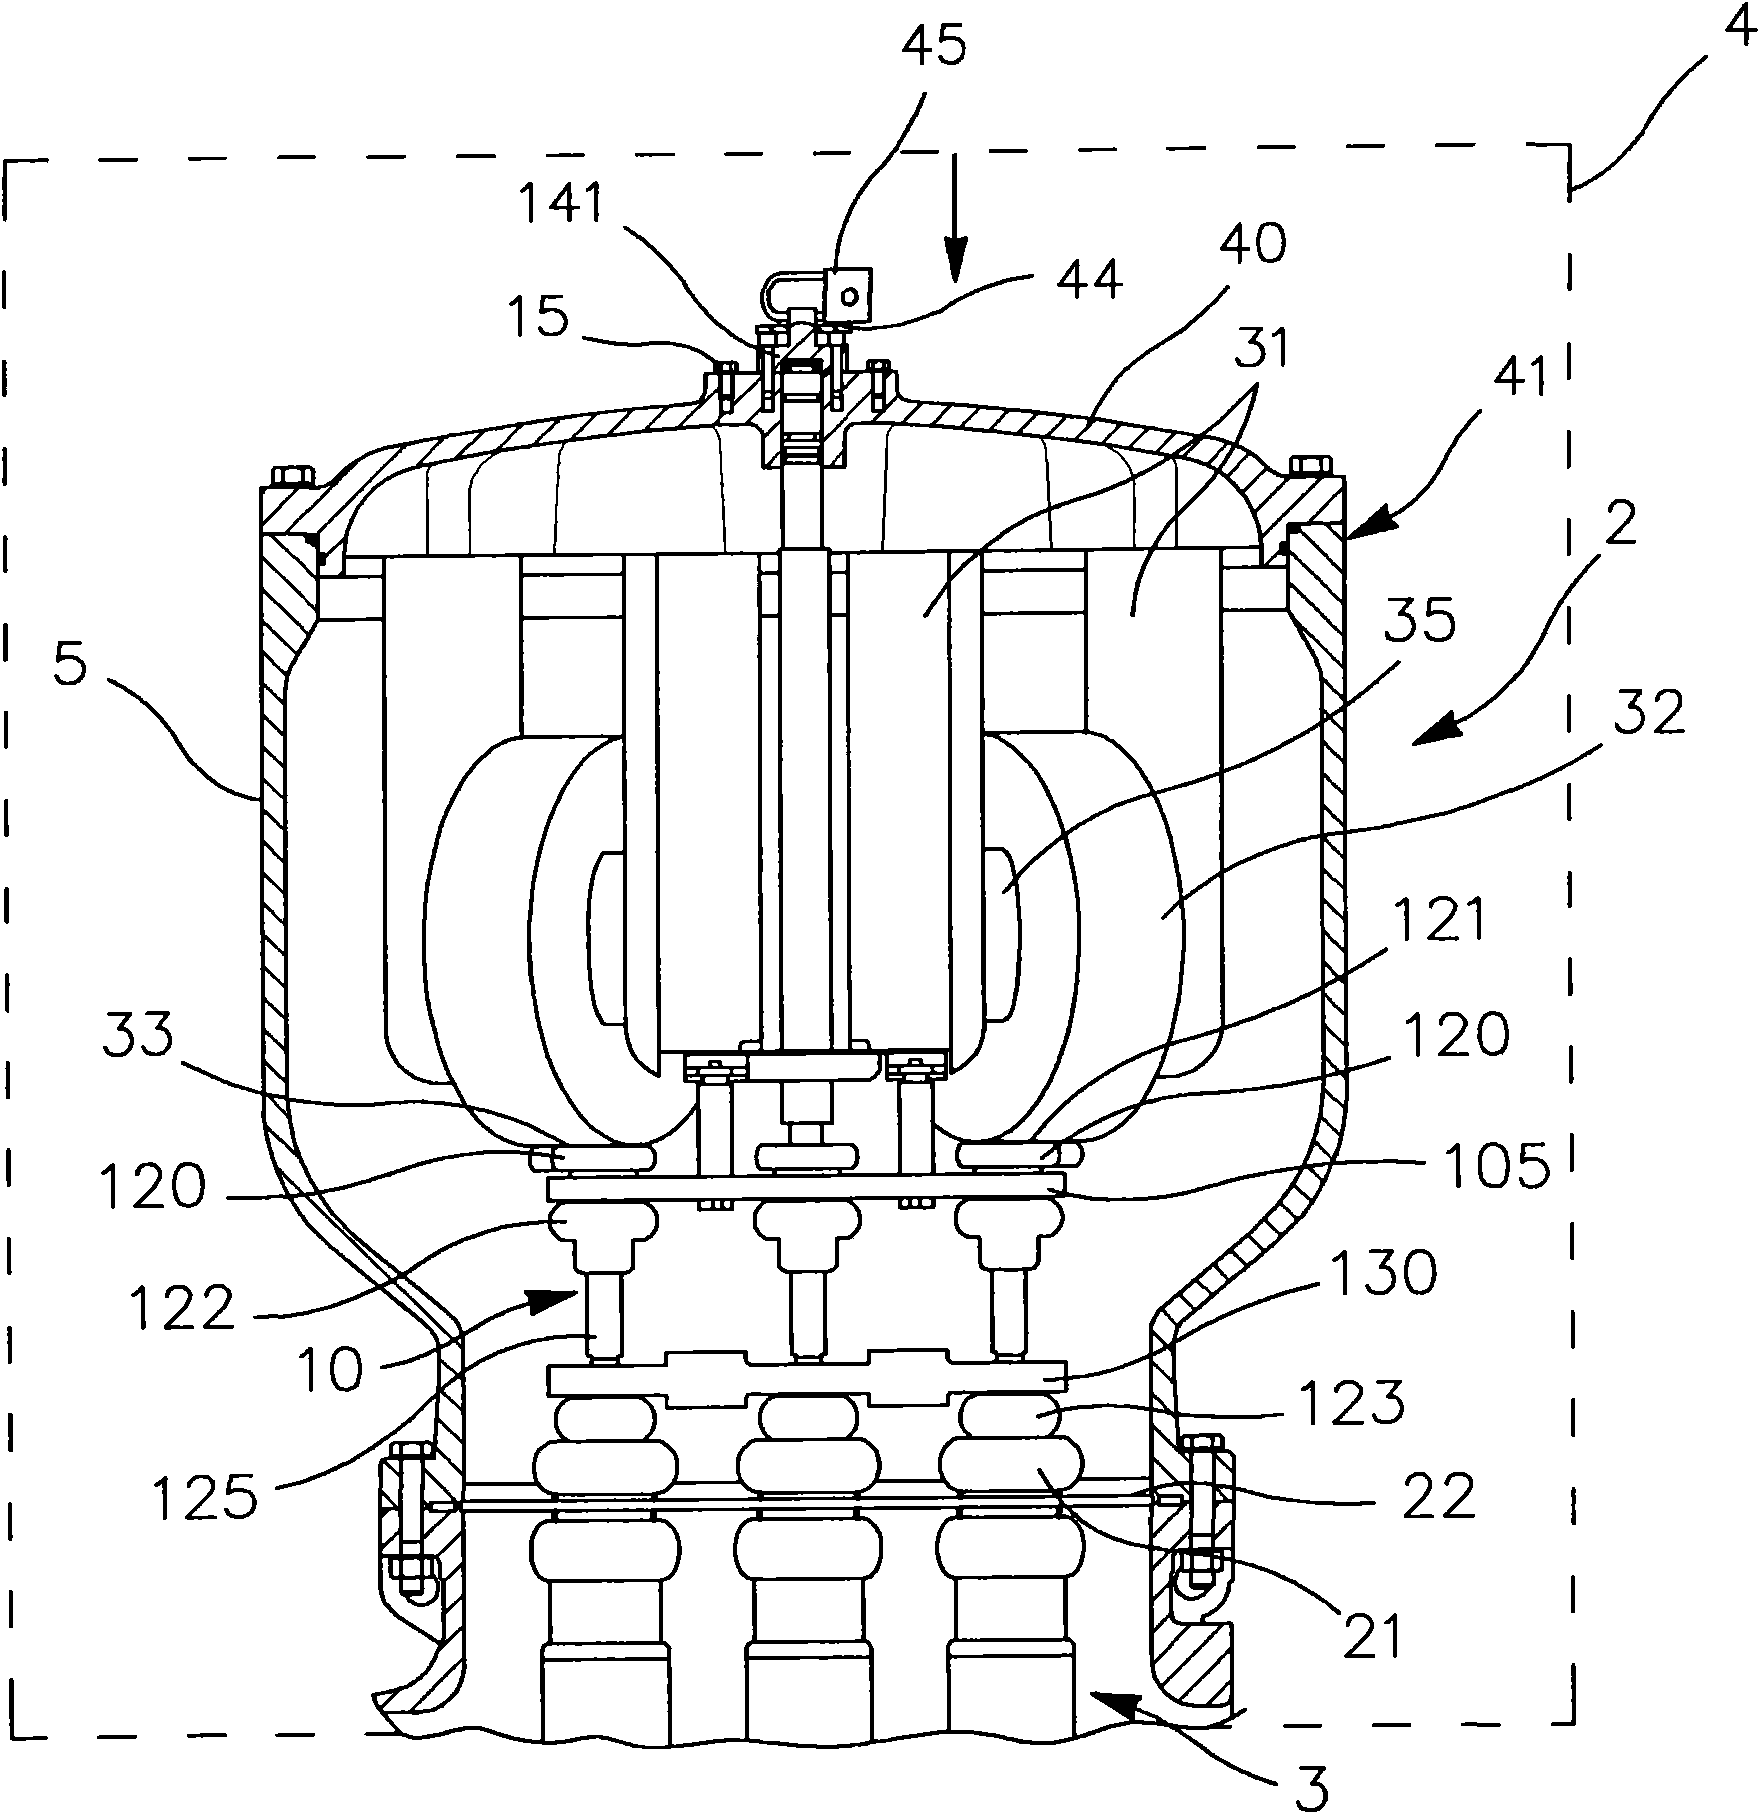 Cut-off device for separating or connecting two parts of an electric circuit, including a voltage transformer